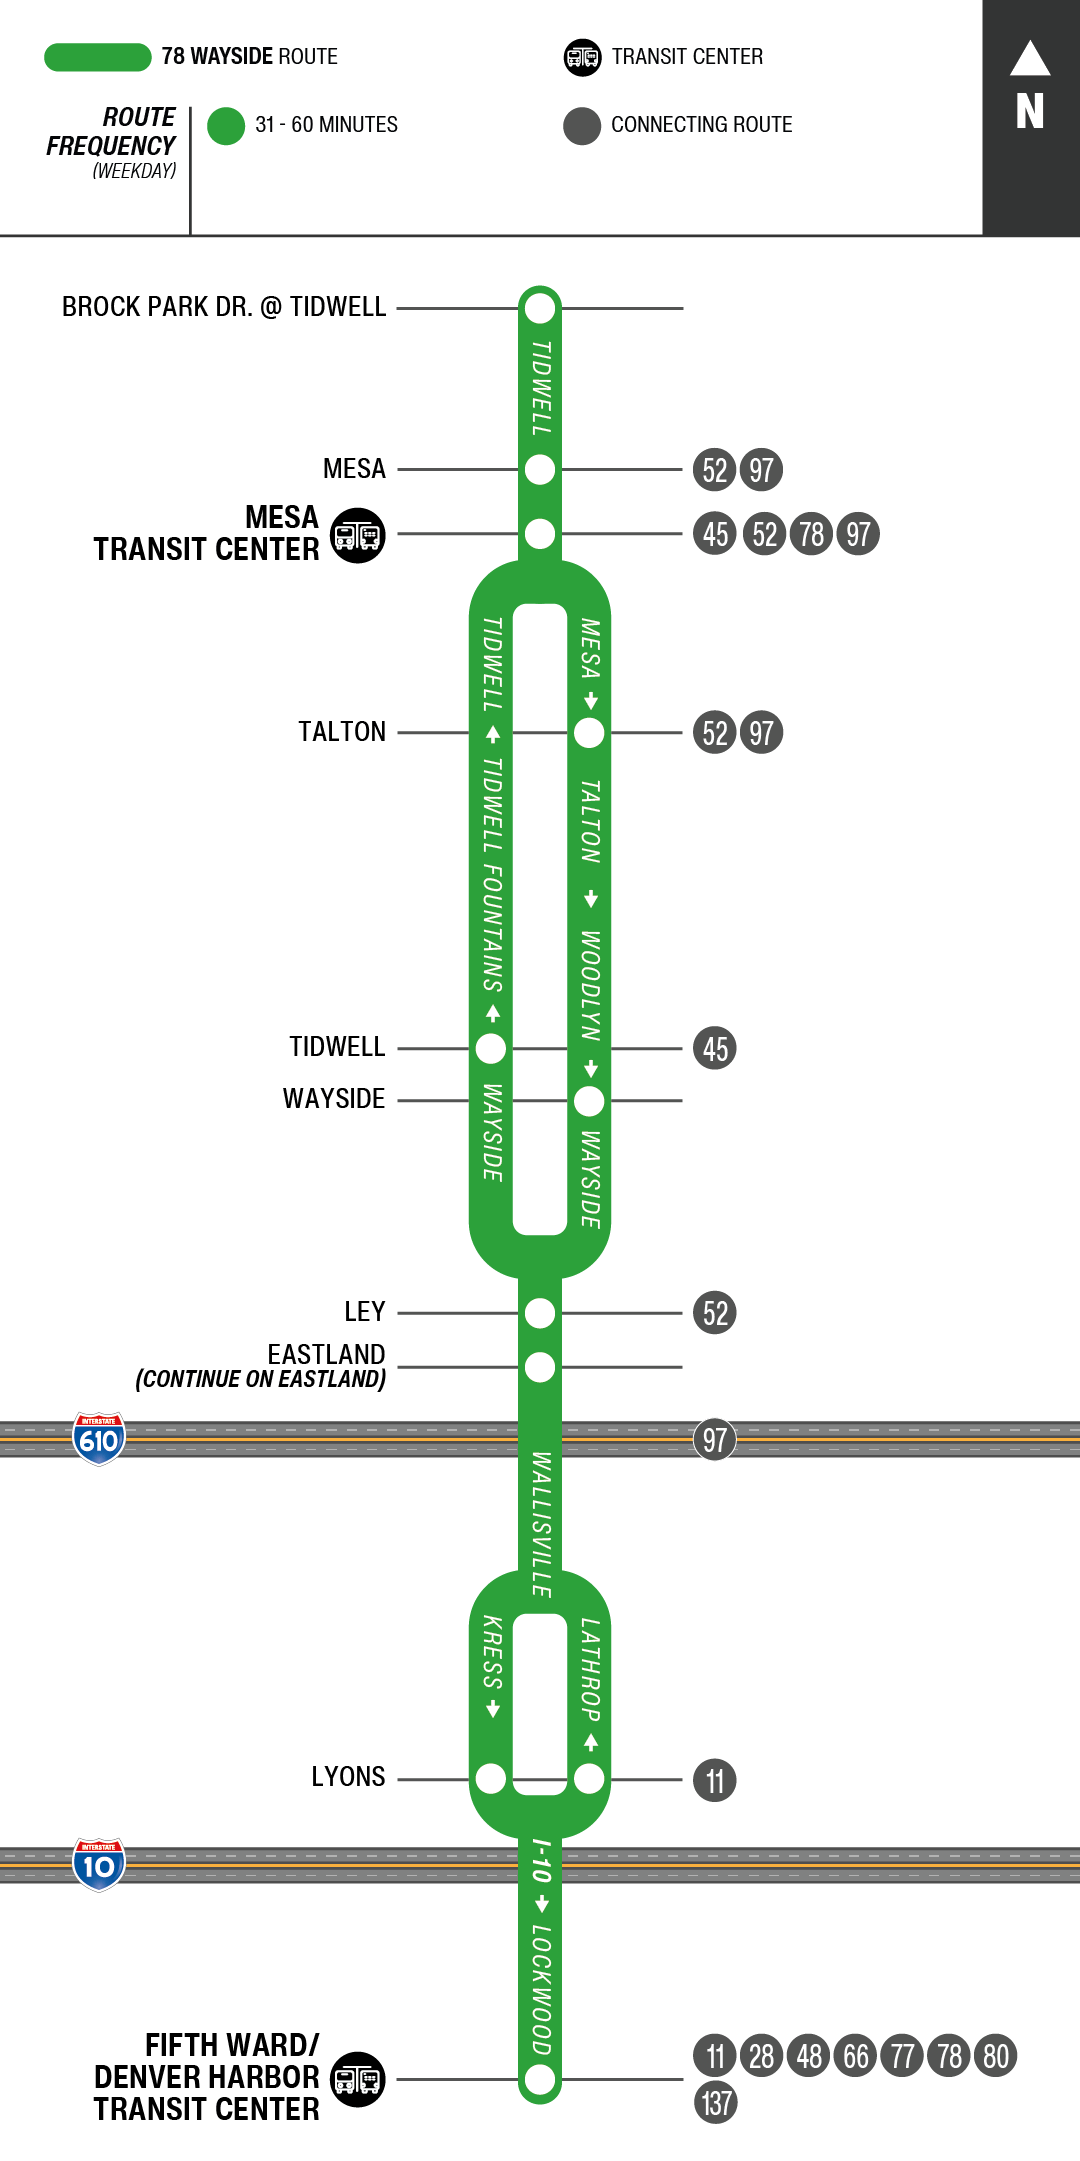 Route map for 78 Wayside bus